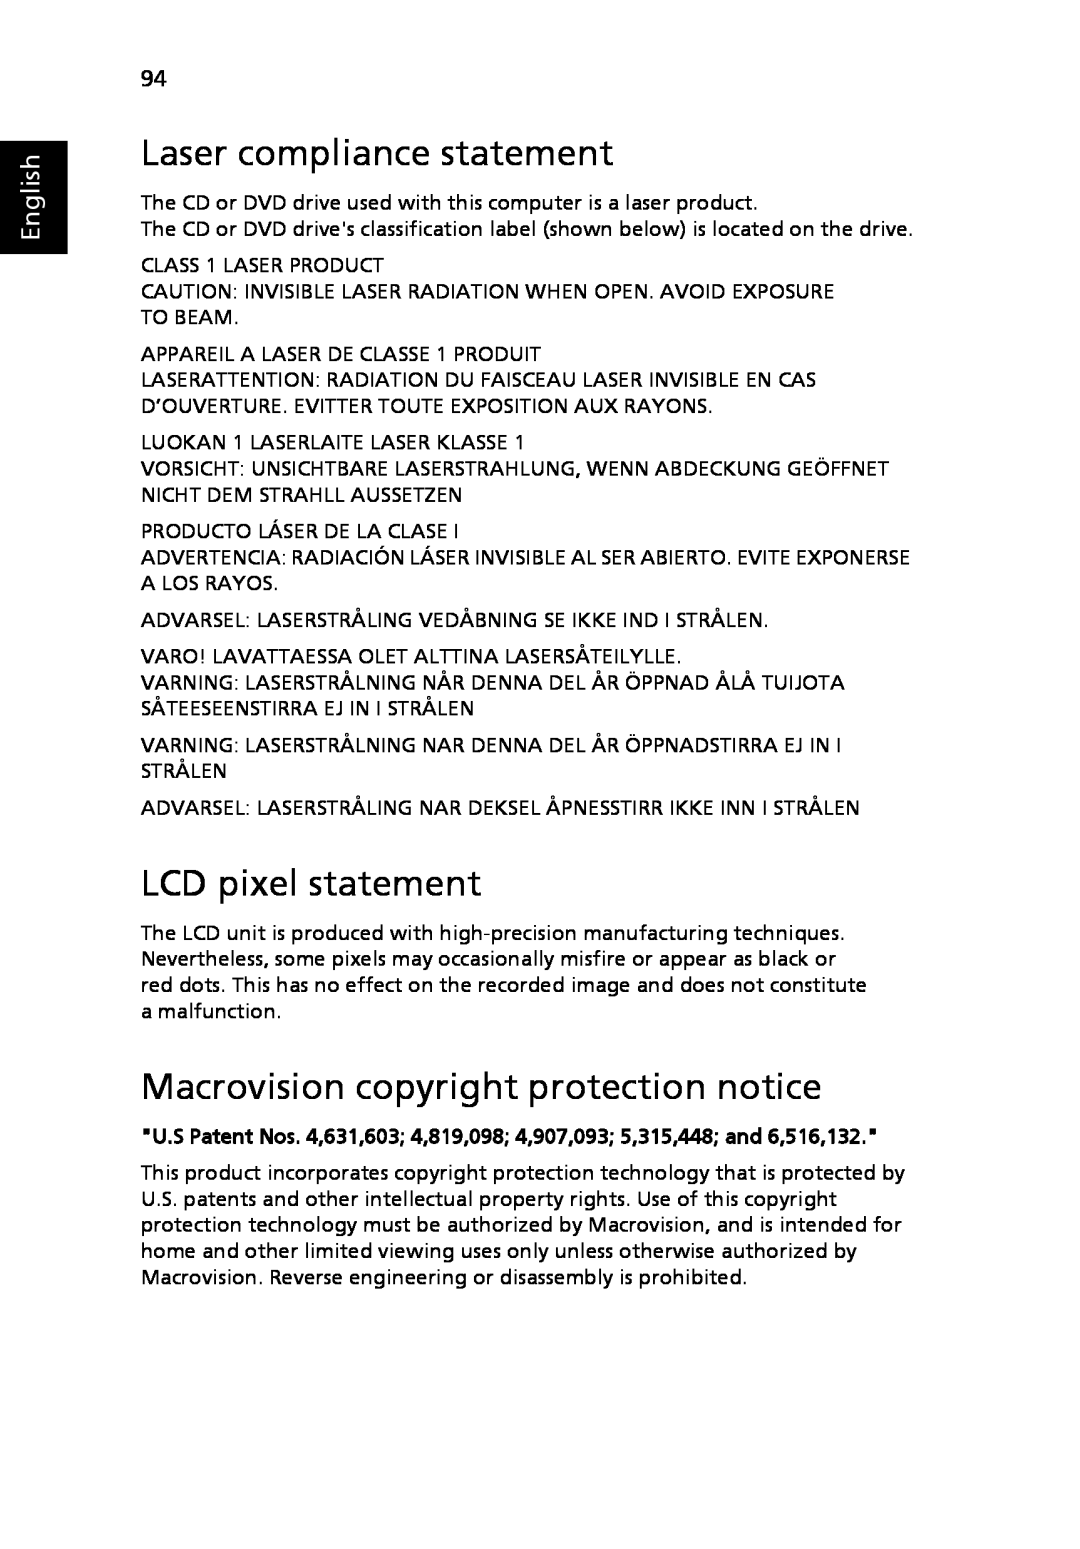 Acer 9120 manual Laser compliance statement, LCD pixel statement, Macrovision copyright protection notice, English 